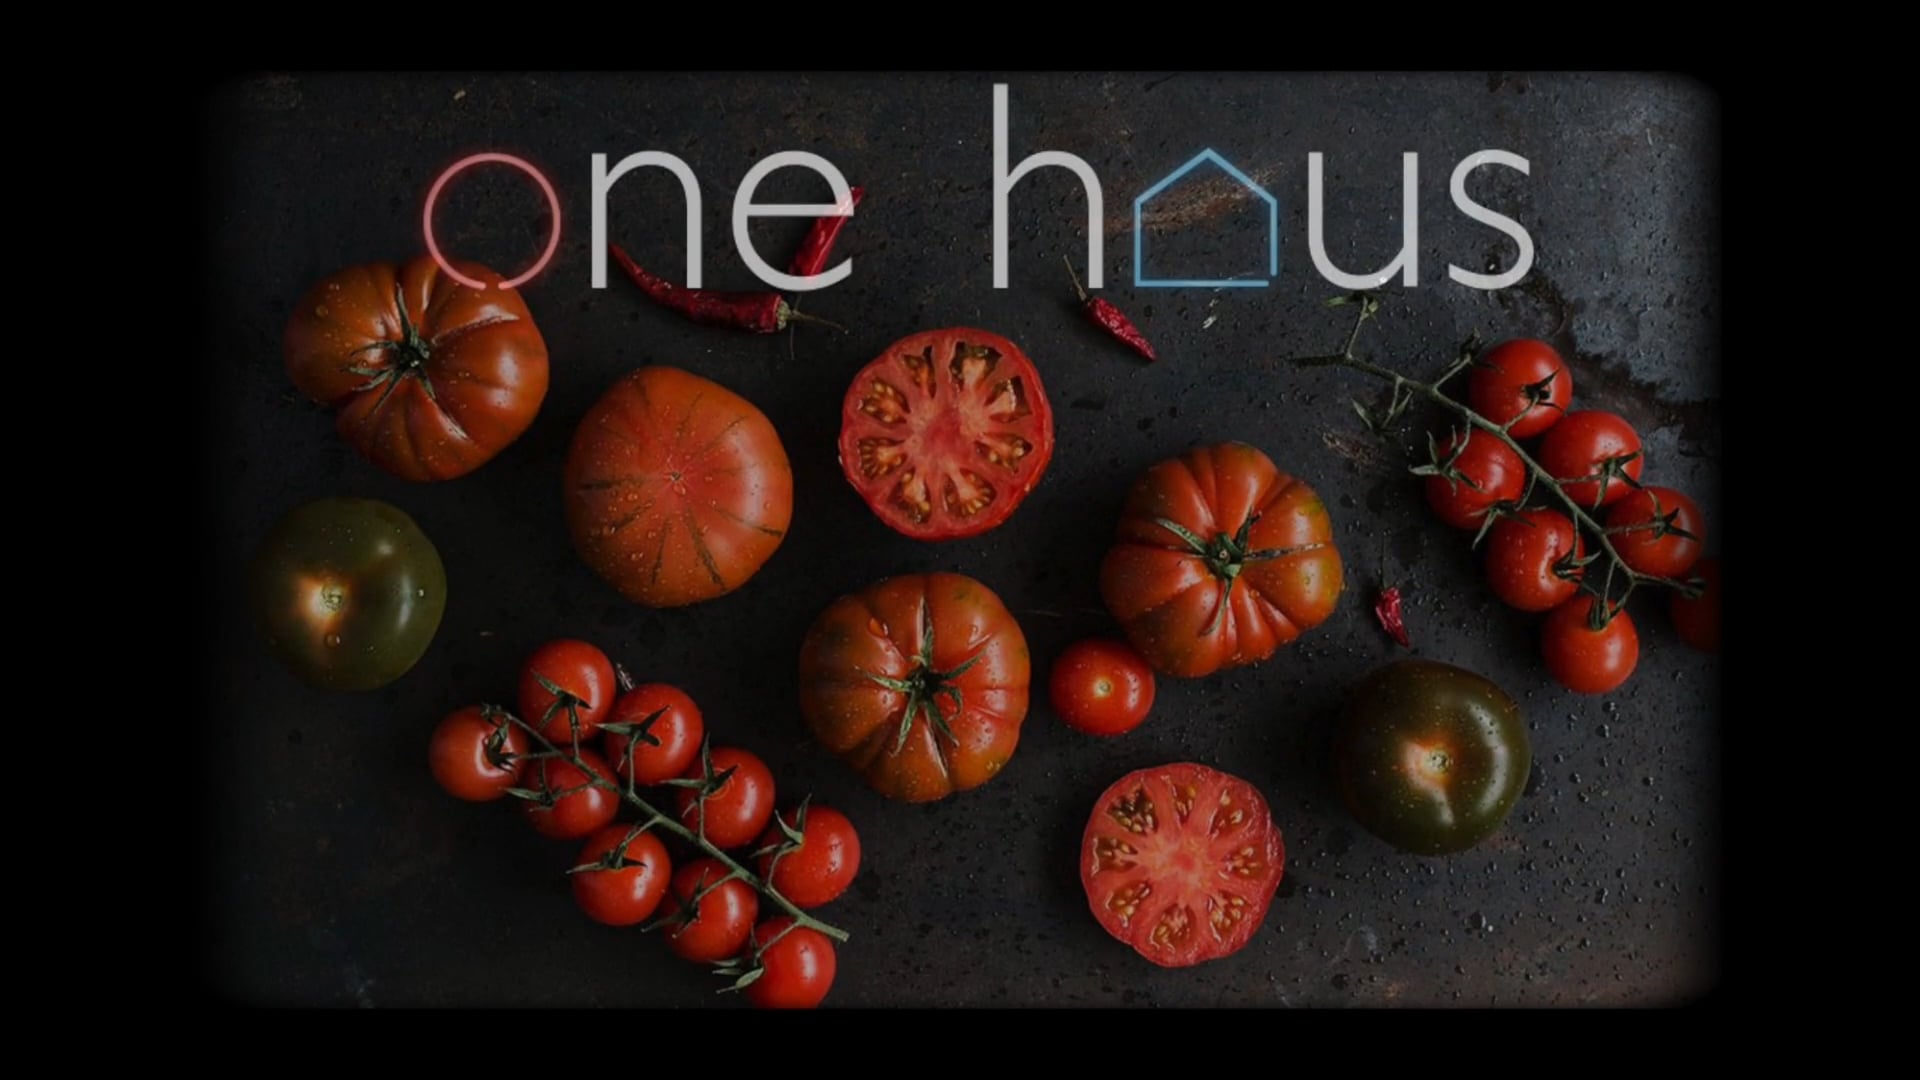 One Haus - Created with Branding Shorts Express